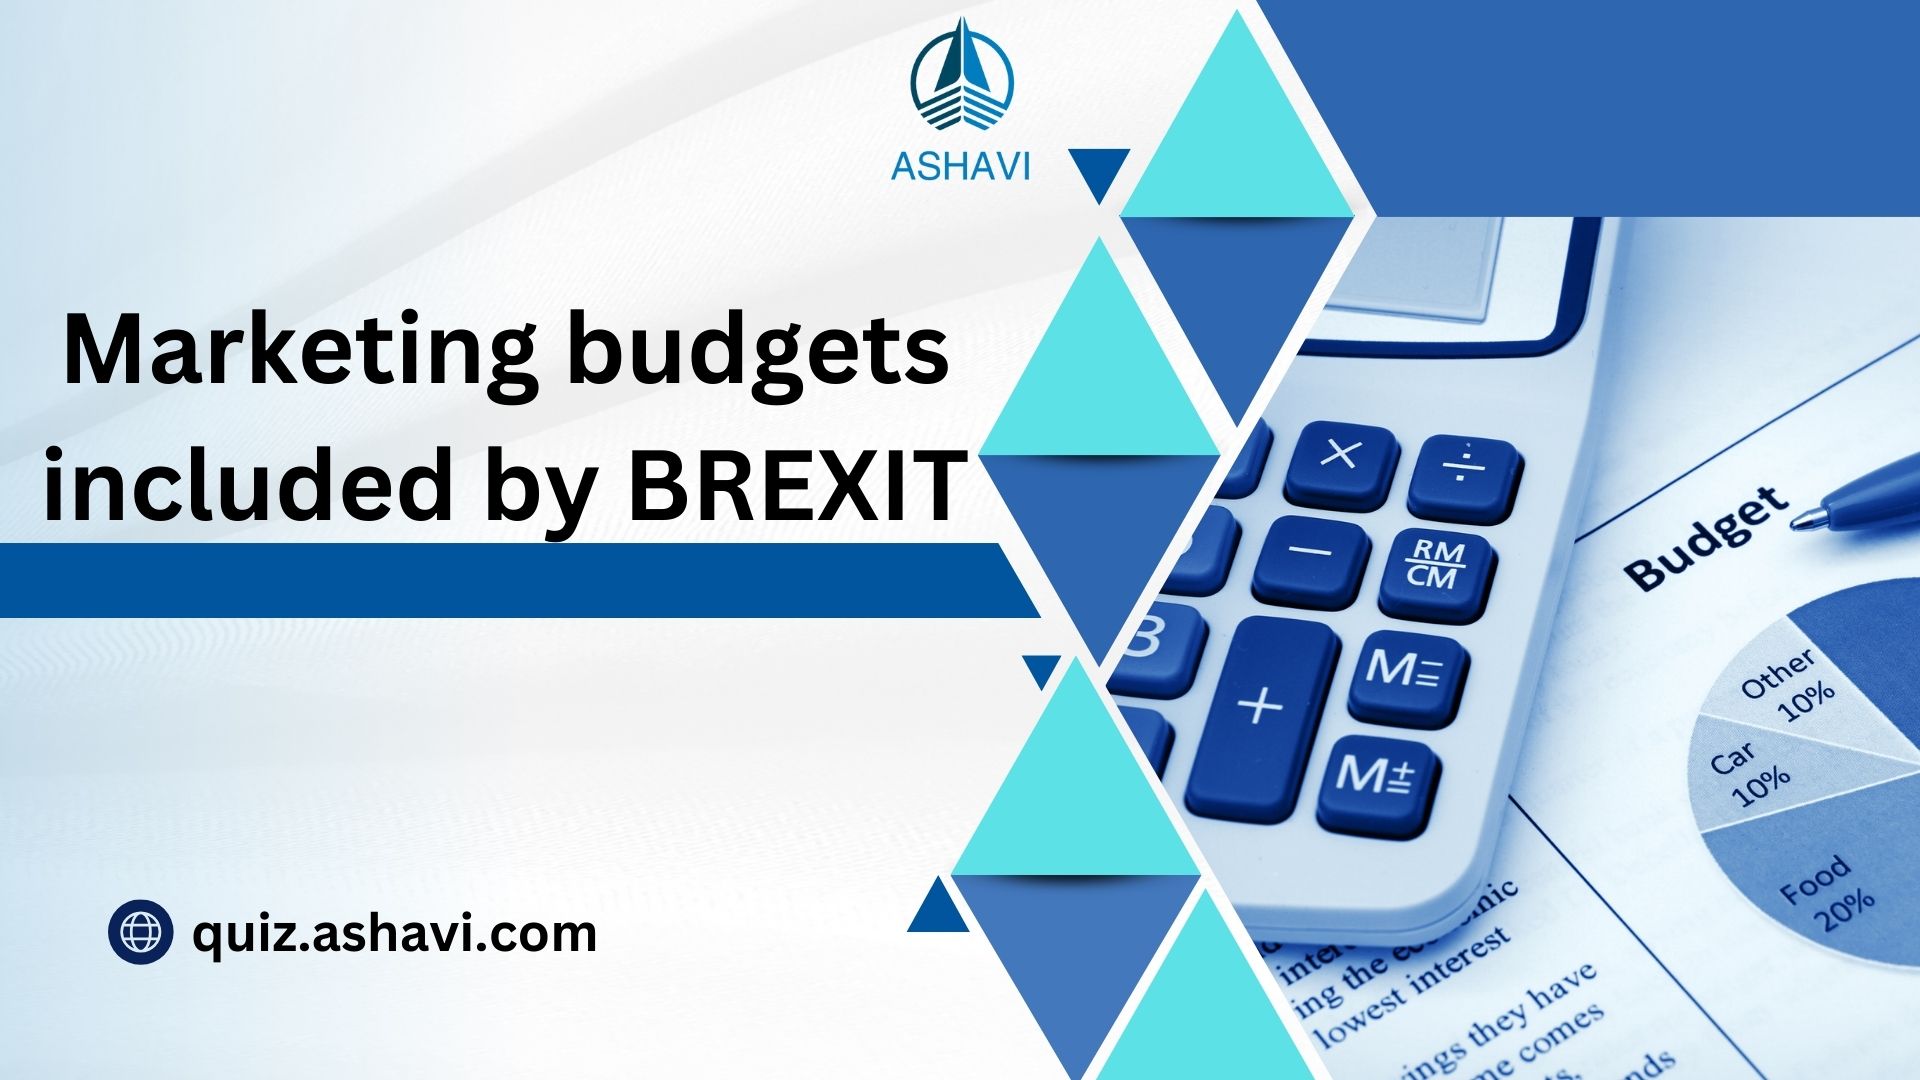 Marketing budgets included by BREXIT